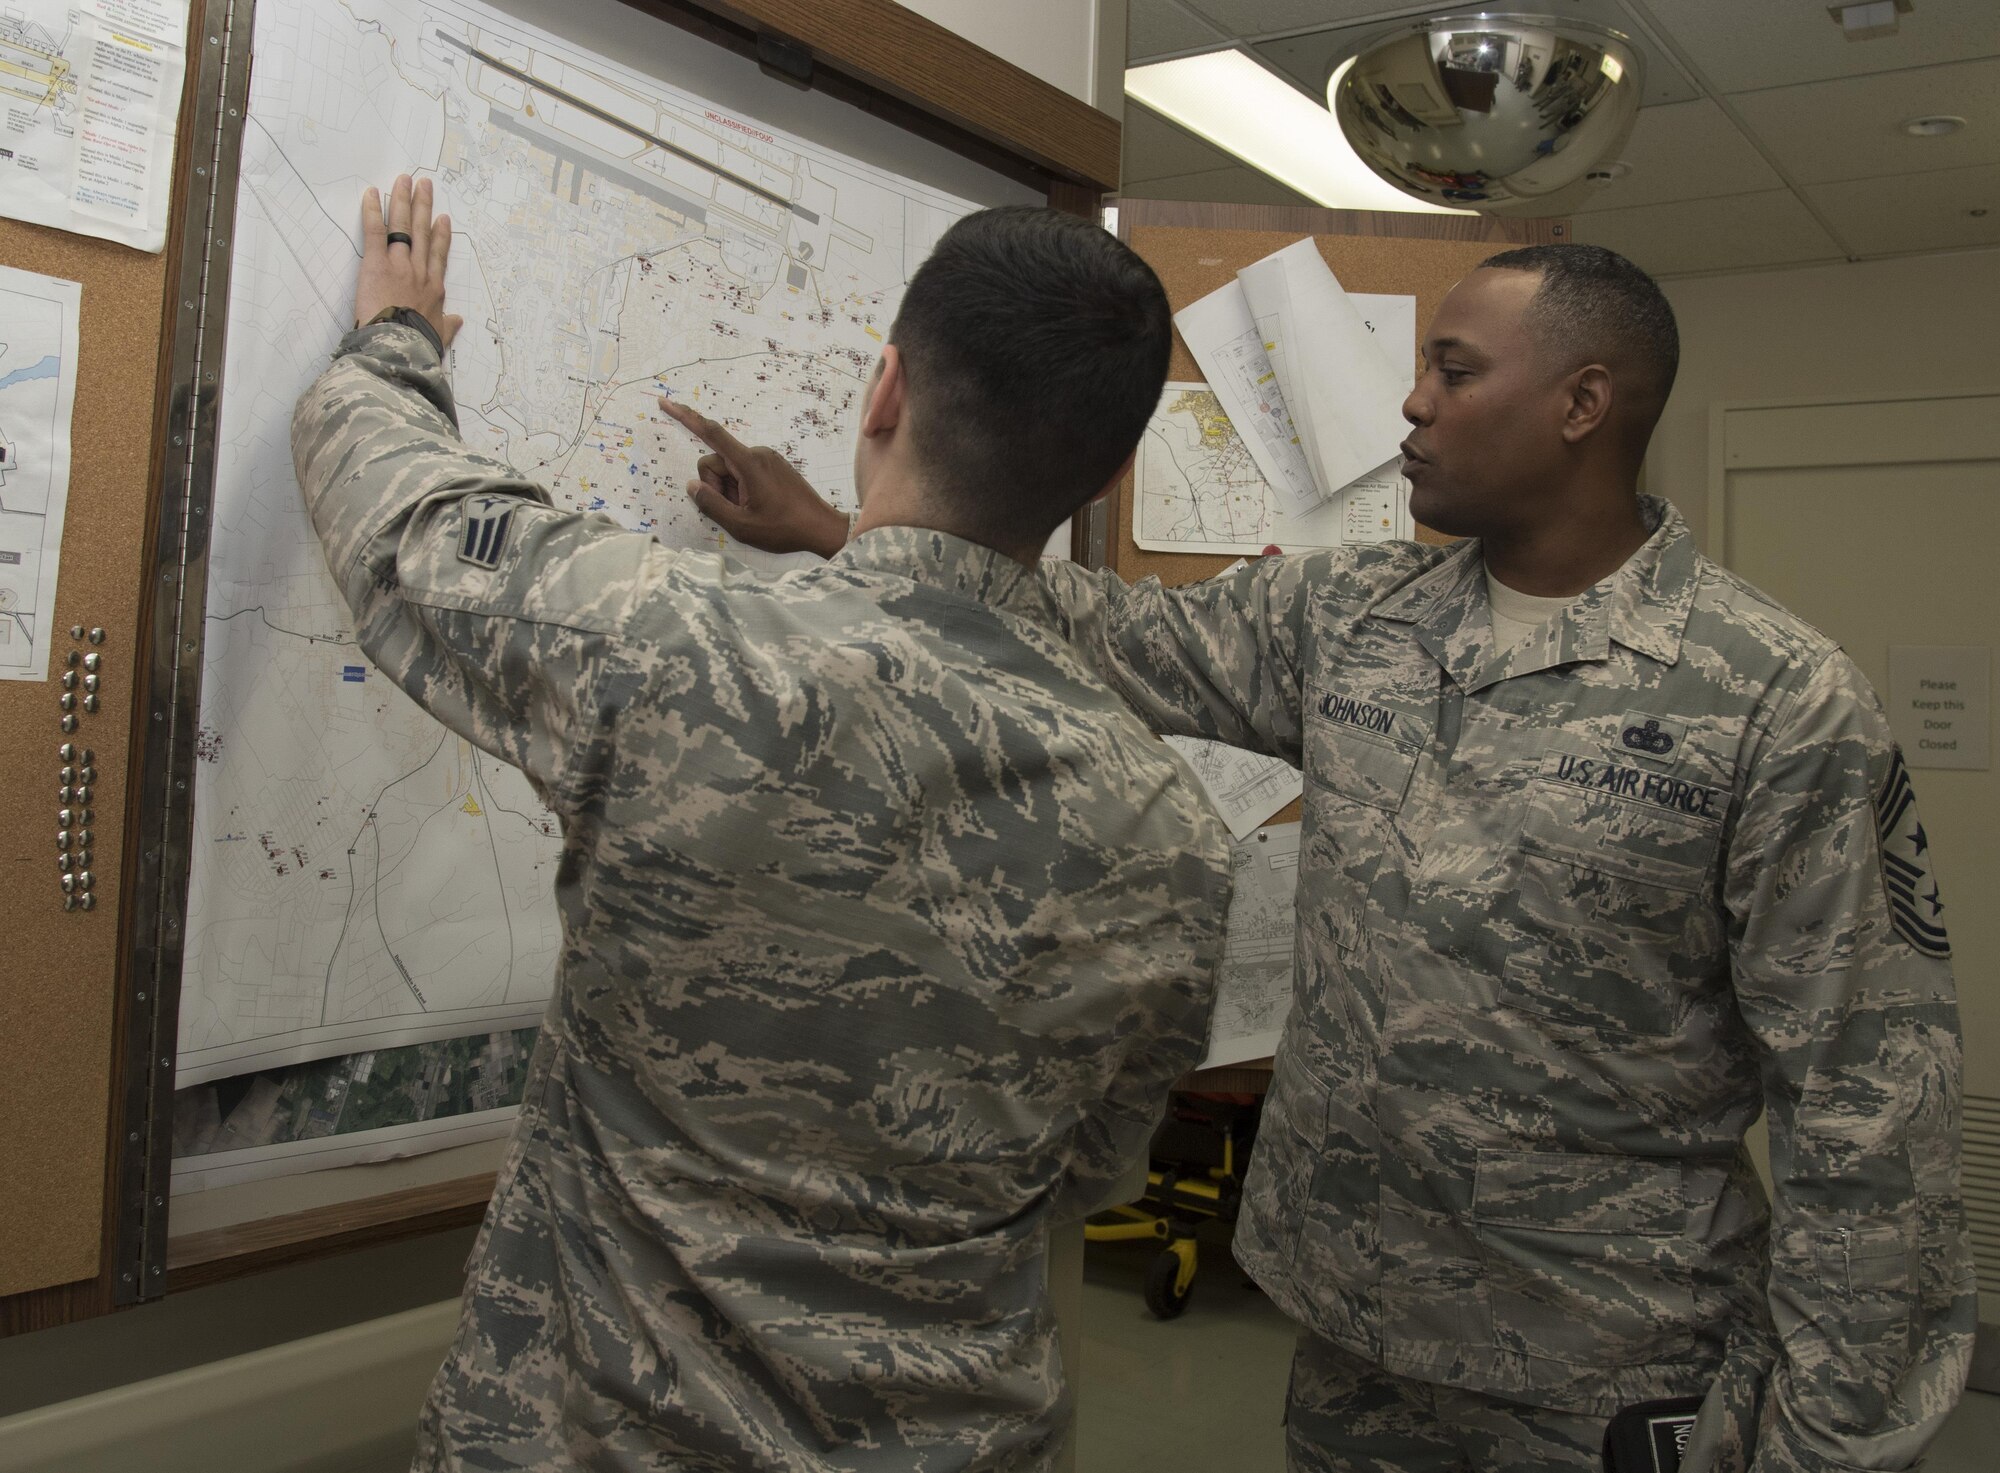 U.S. Air Force Senior Airman Dylan Gorr, left, a 35th Medical Operations Squadron aerospace medical service technician, looks at a map of Misawa City, Japan, with Chief Master Sgt. Anthony Johnson, the Pacific Air Forces' command chief, during his tour at Misawa Air Base, Japan, July 11, 2017. During the visit, Airmen explained their current capabilities as well as the challenges they face in their career. (U.S. Air Force photo by Airman 1st Class Sadie Colbert)